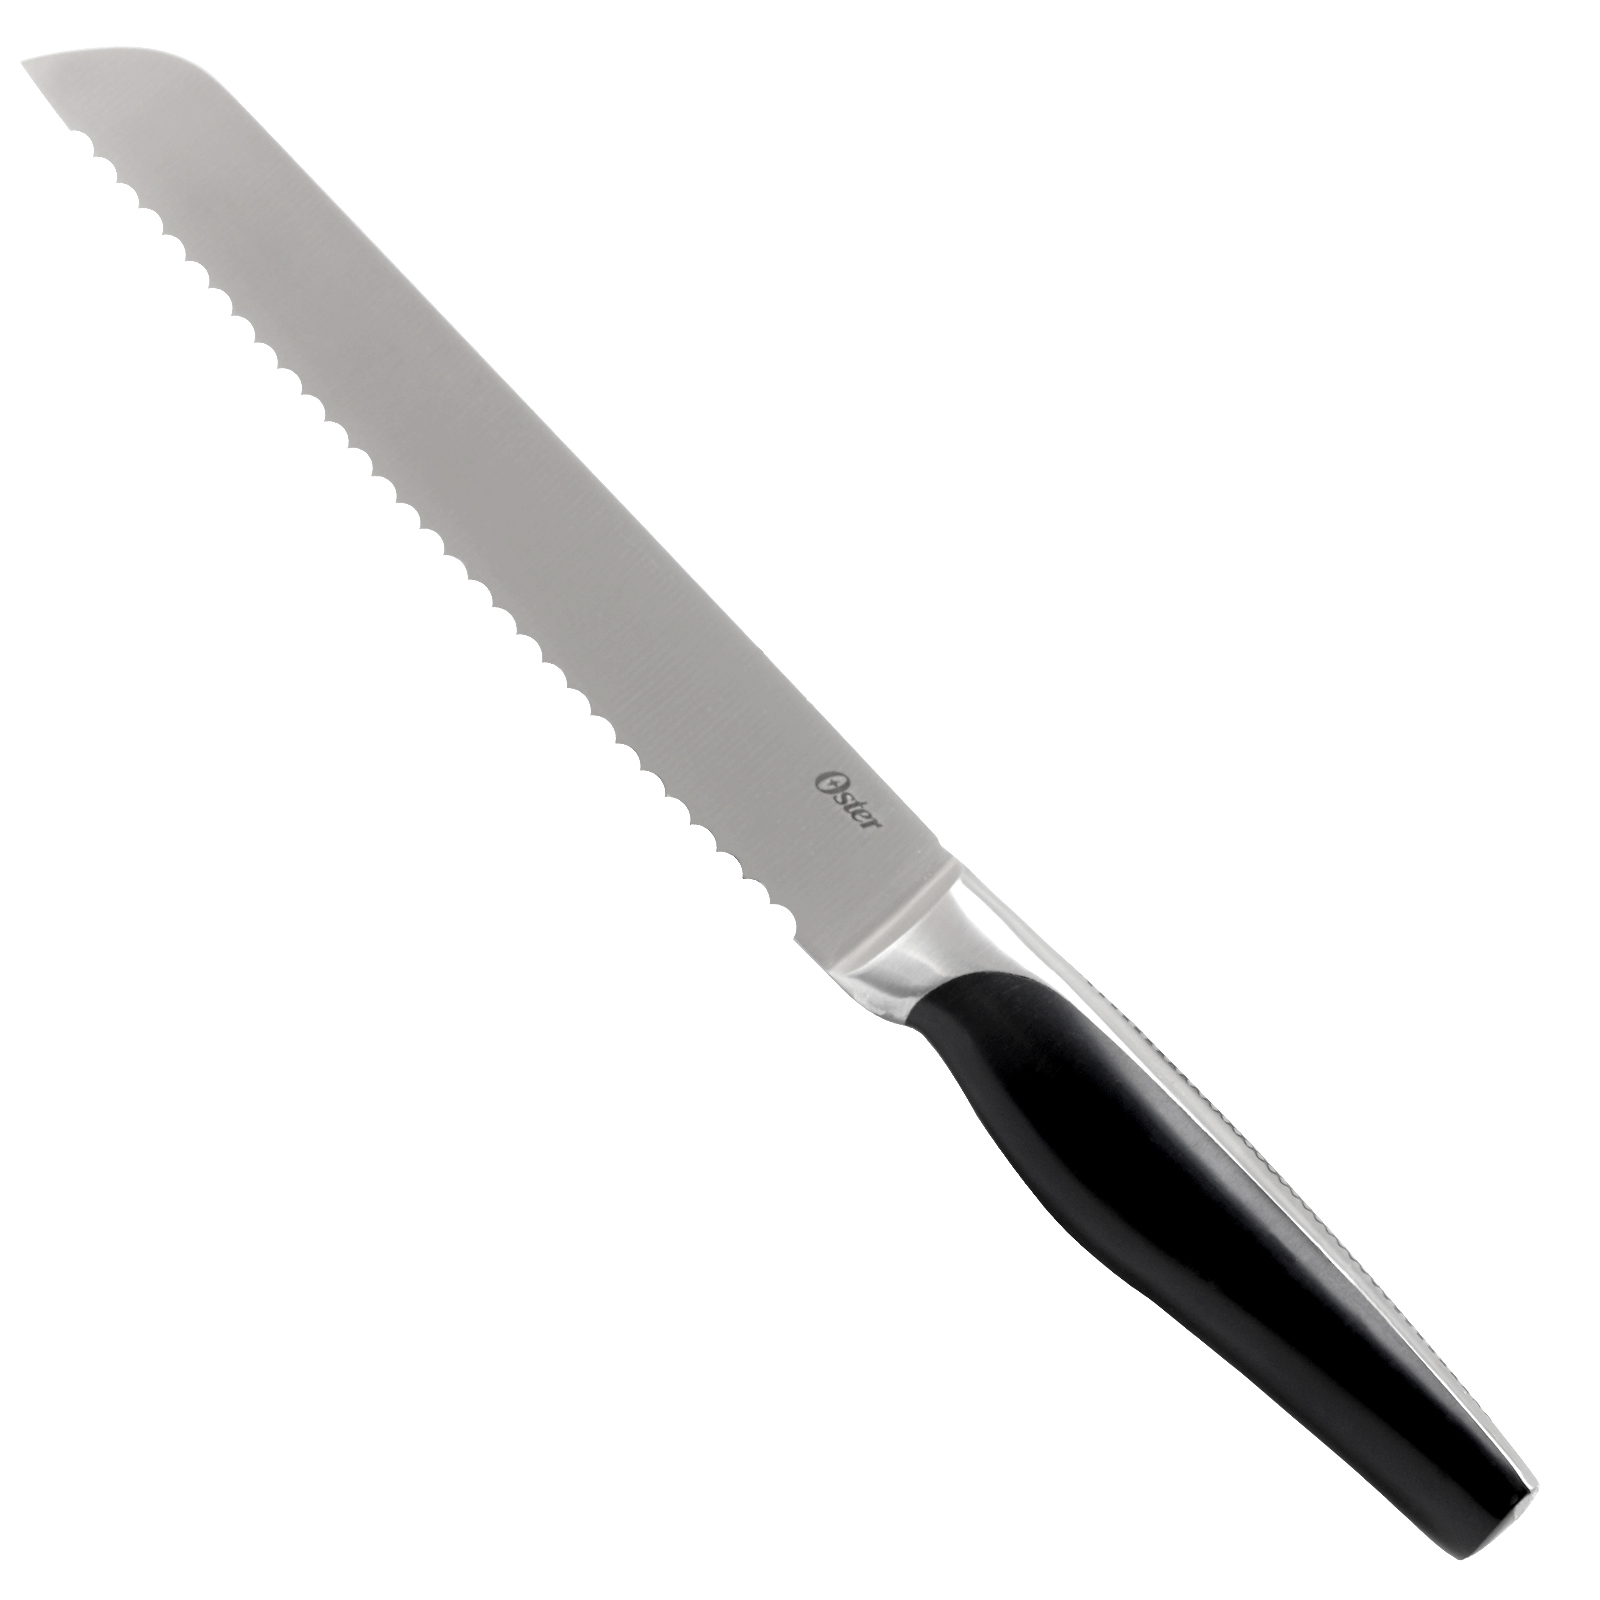 Oster Montreux 8 inch Bread Knife